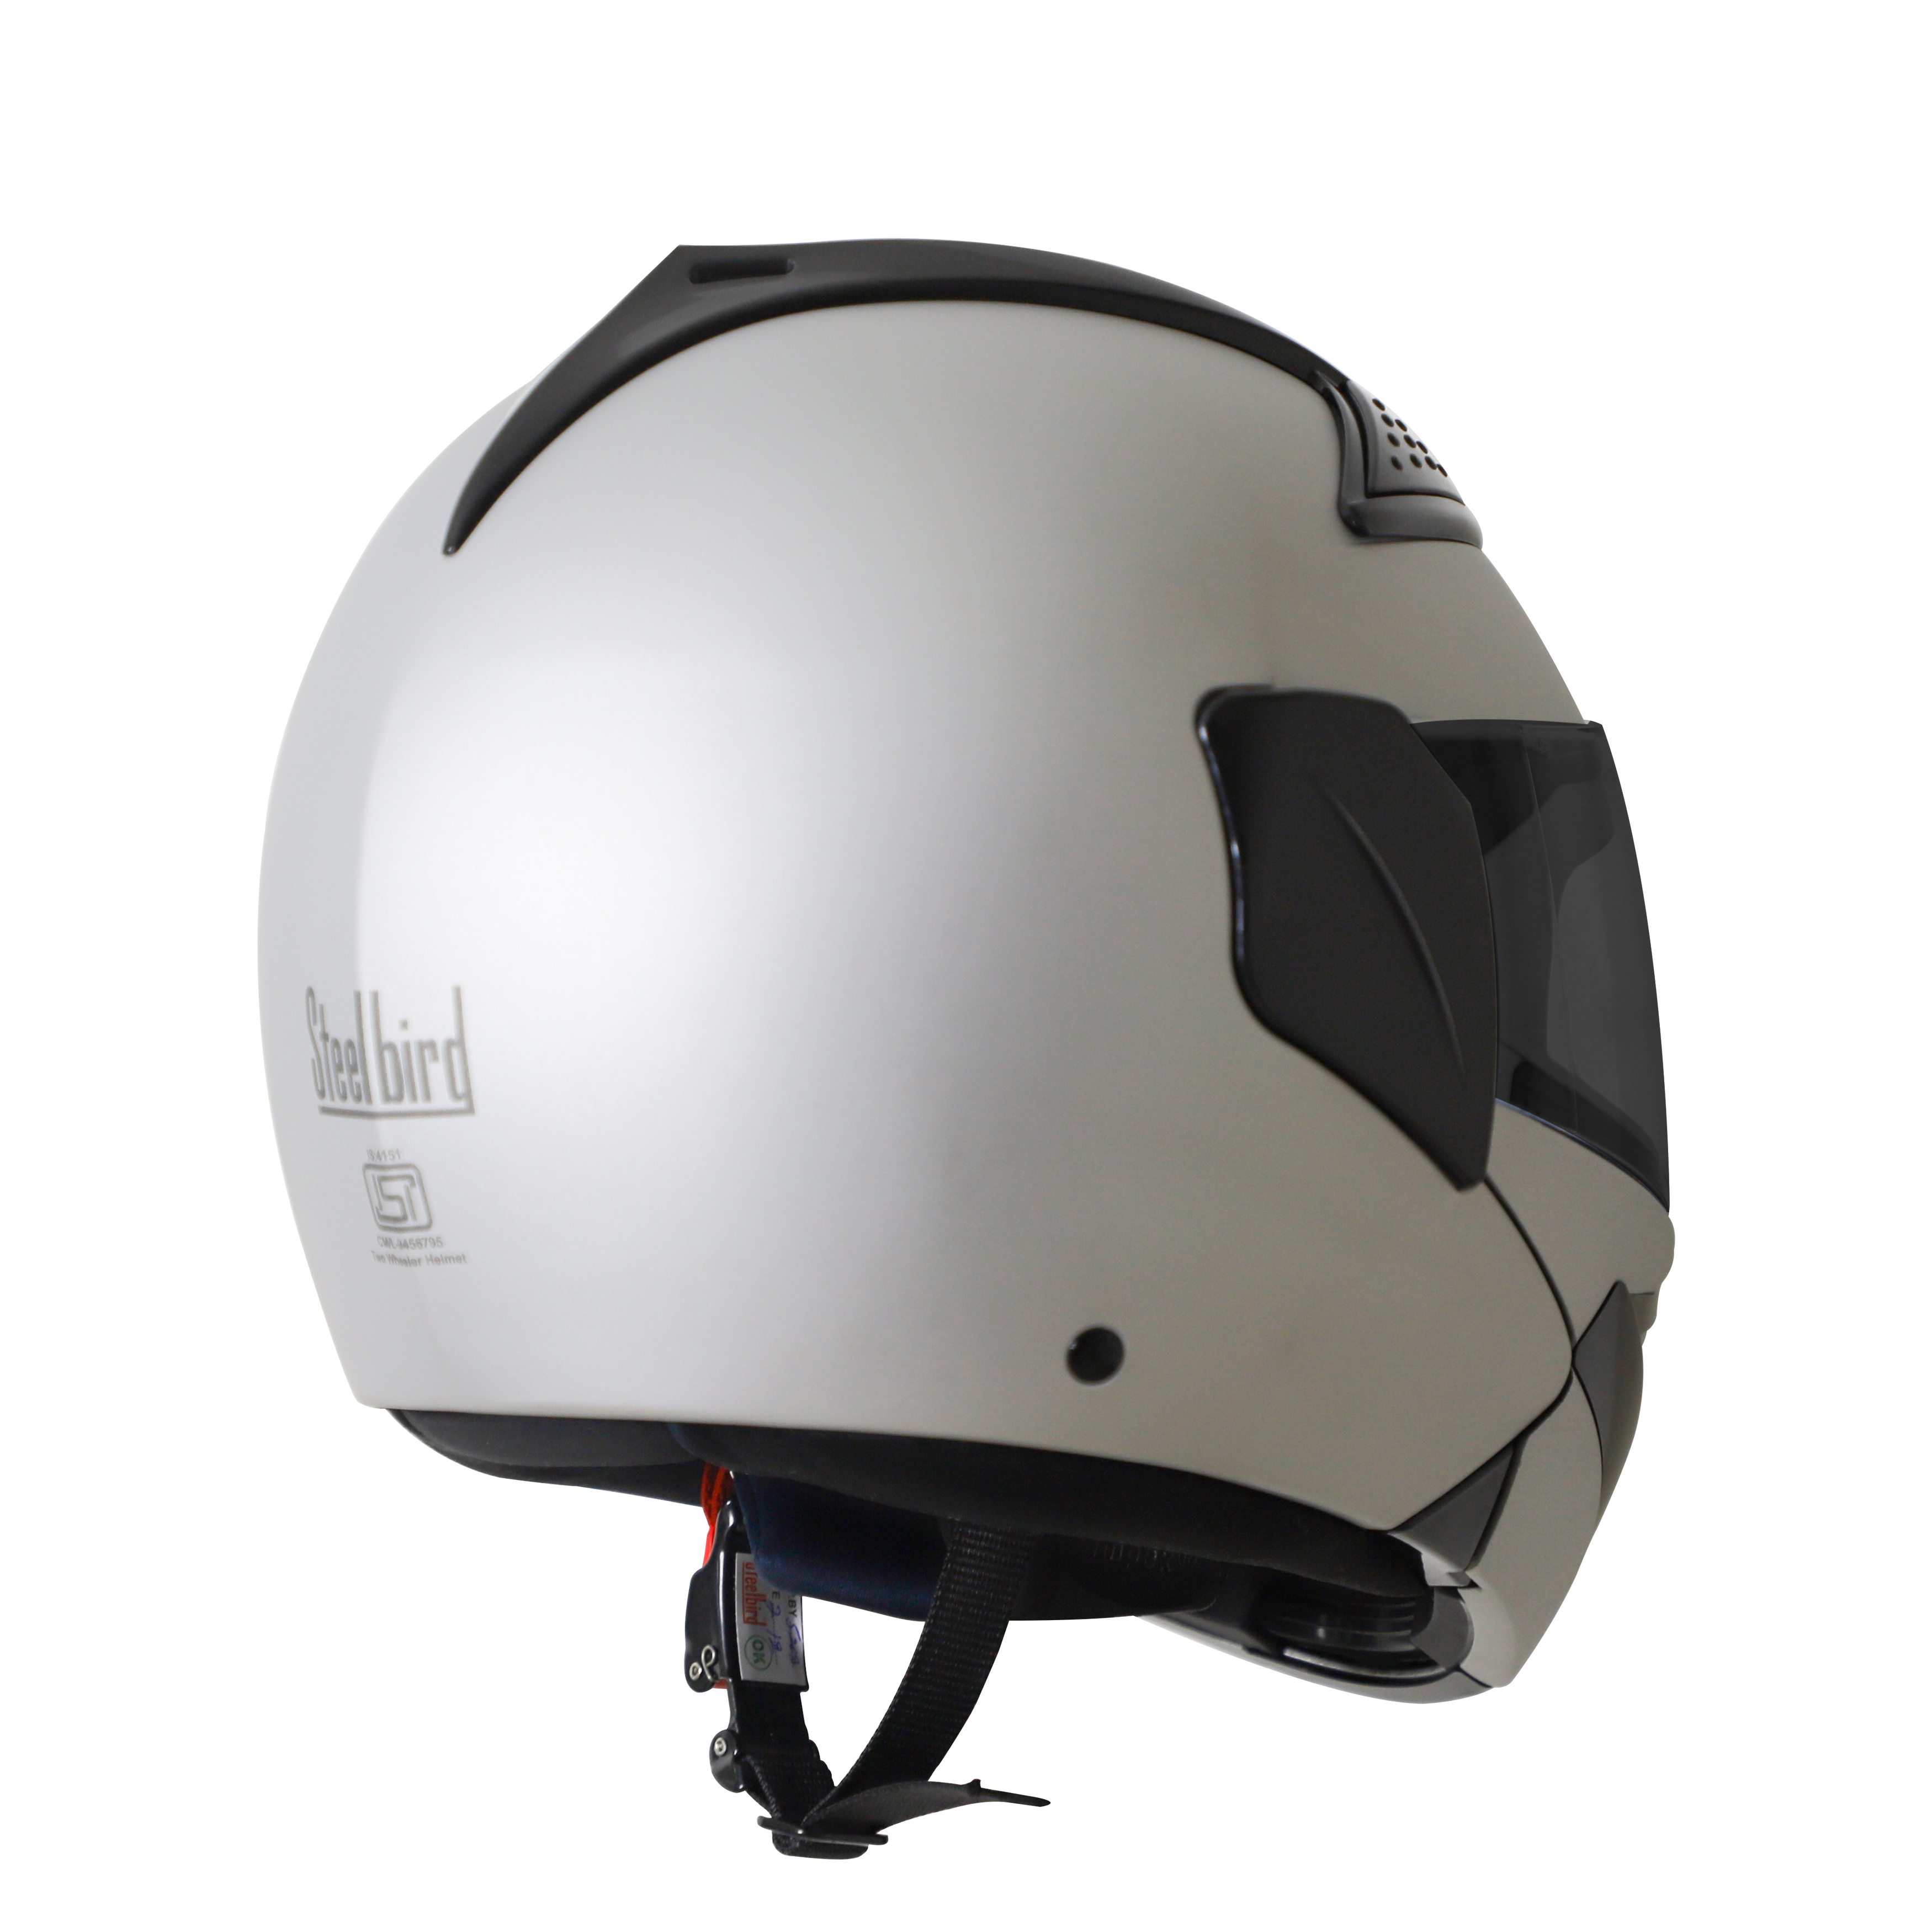 Steelbird SB-34 ISI Certified Flip-Up Helmet For Men And Women (Glossy Silver With Smoke Visor)